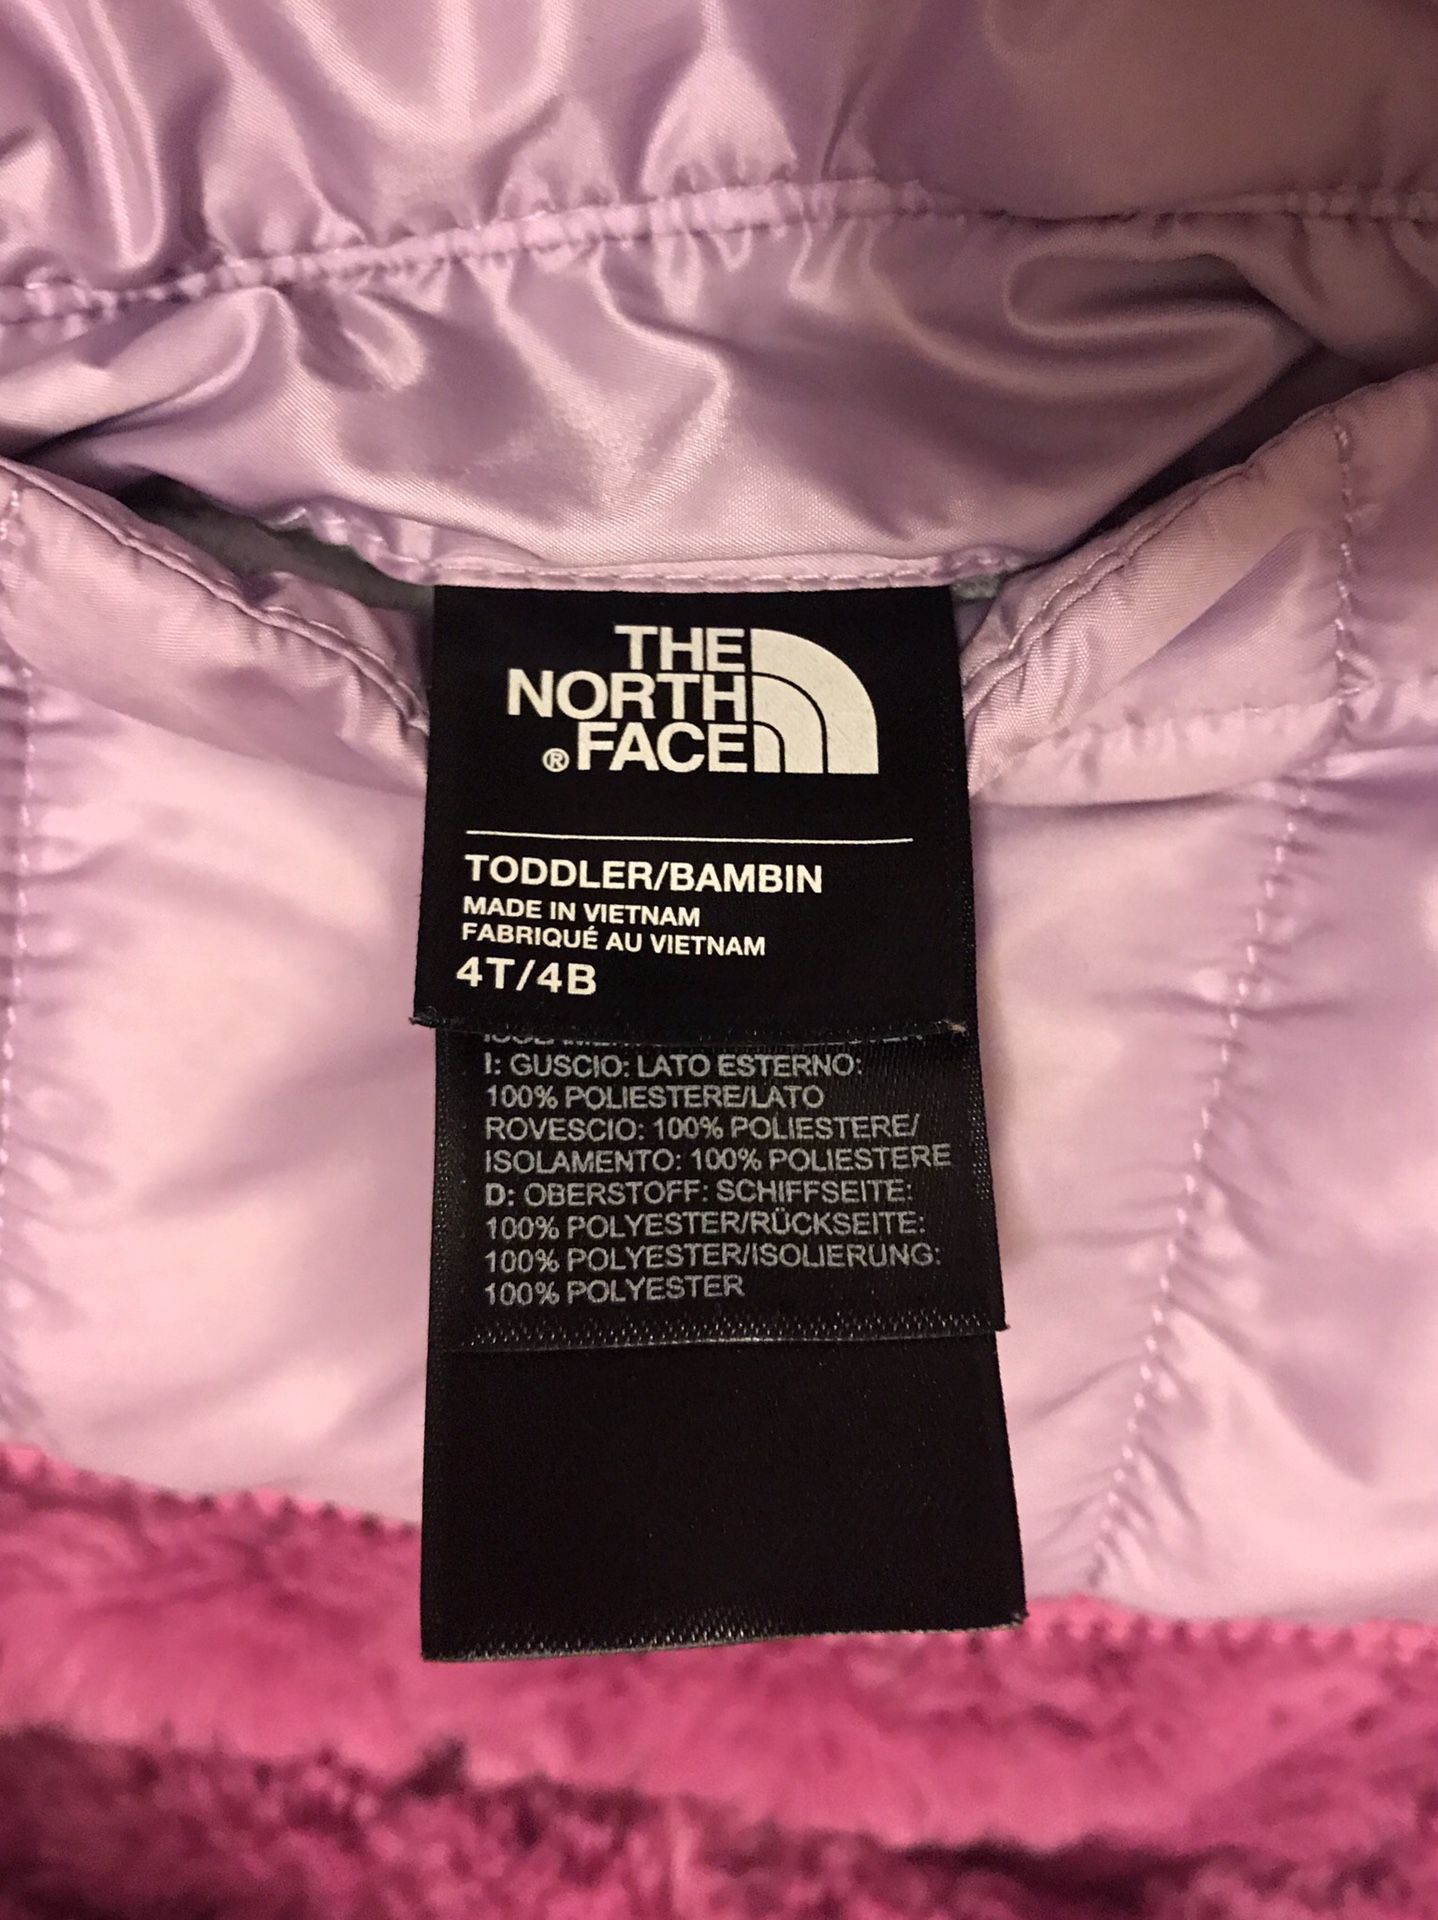 North Face for kids